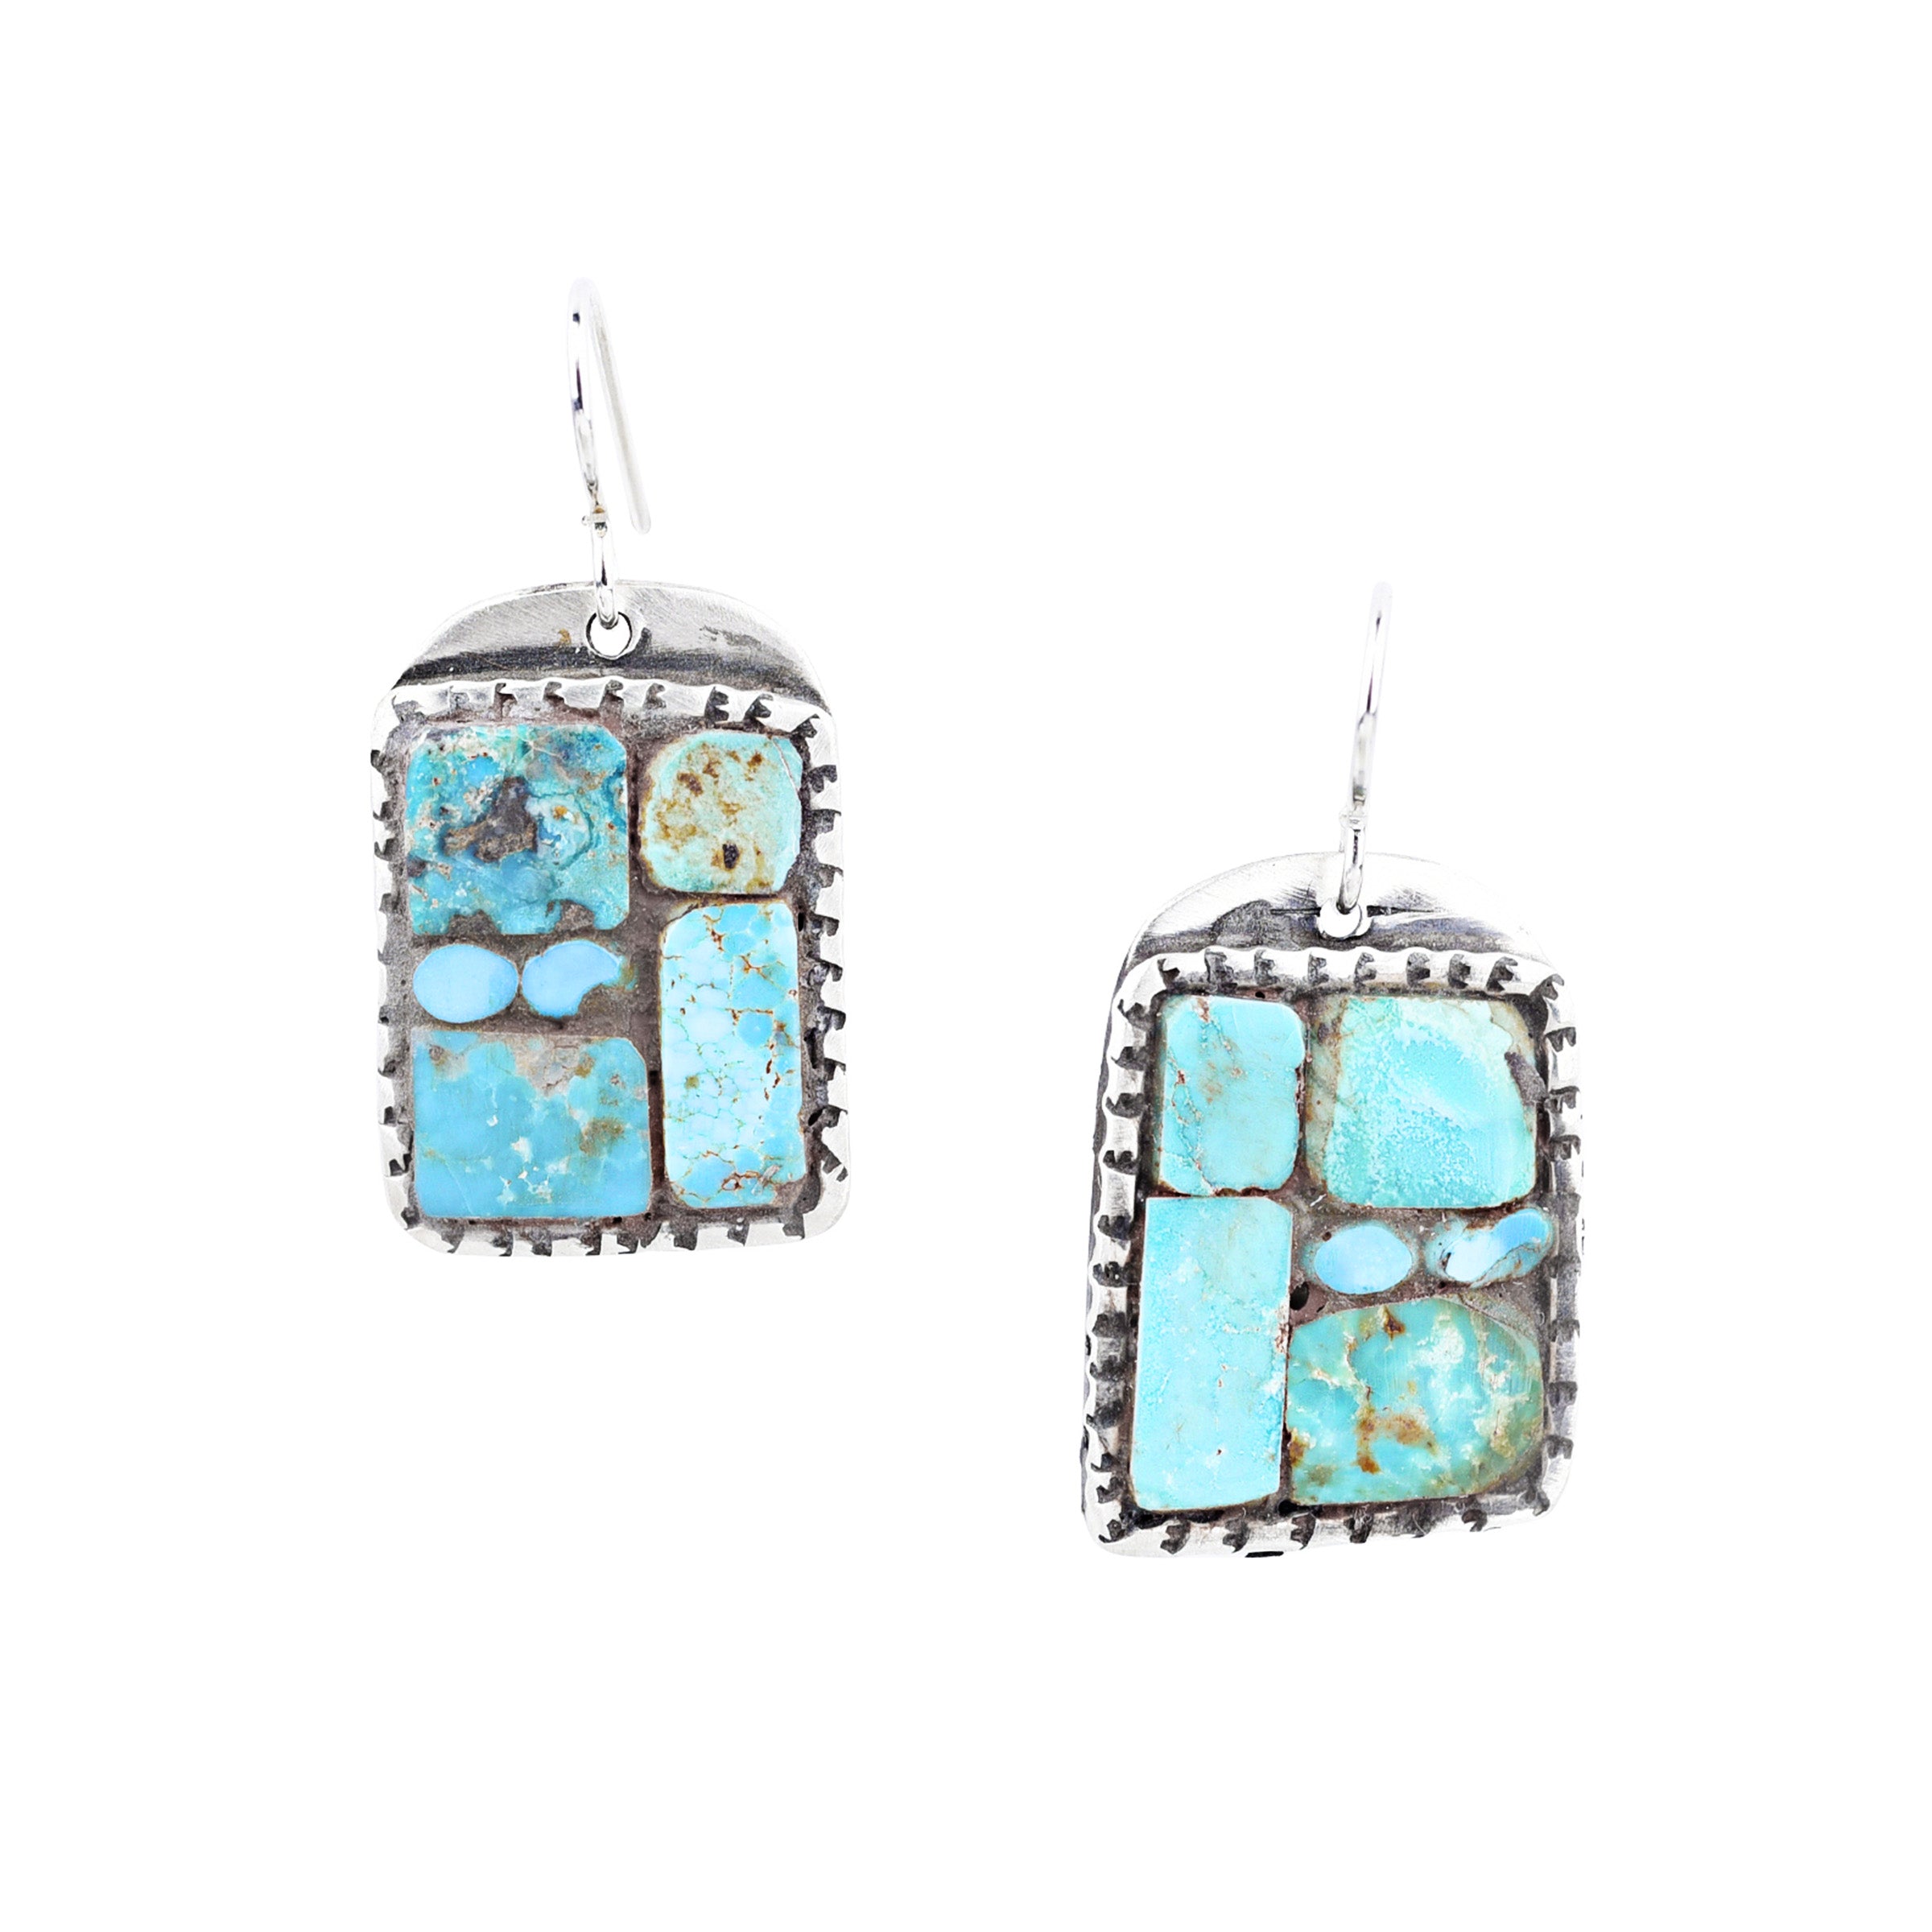 Charlie Favour Mosaic Earrings